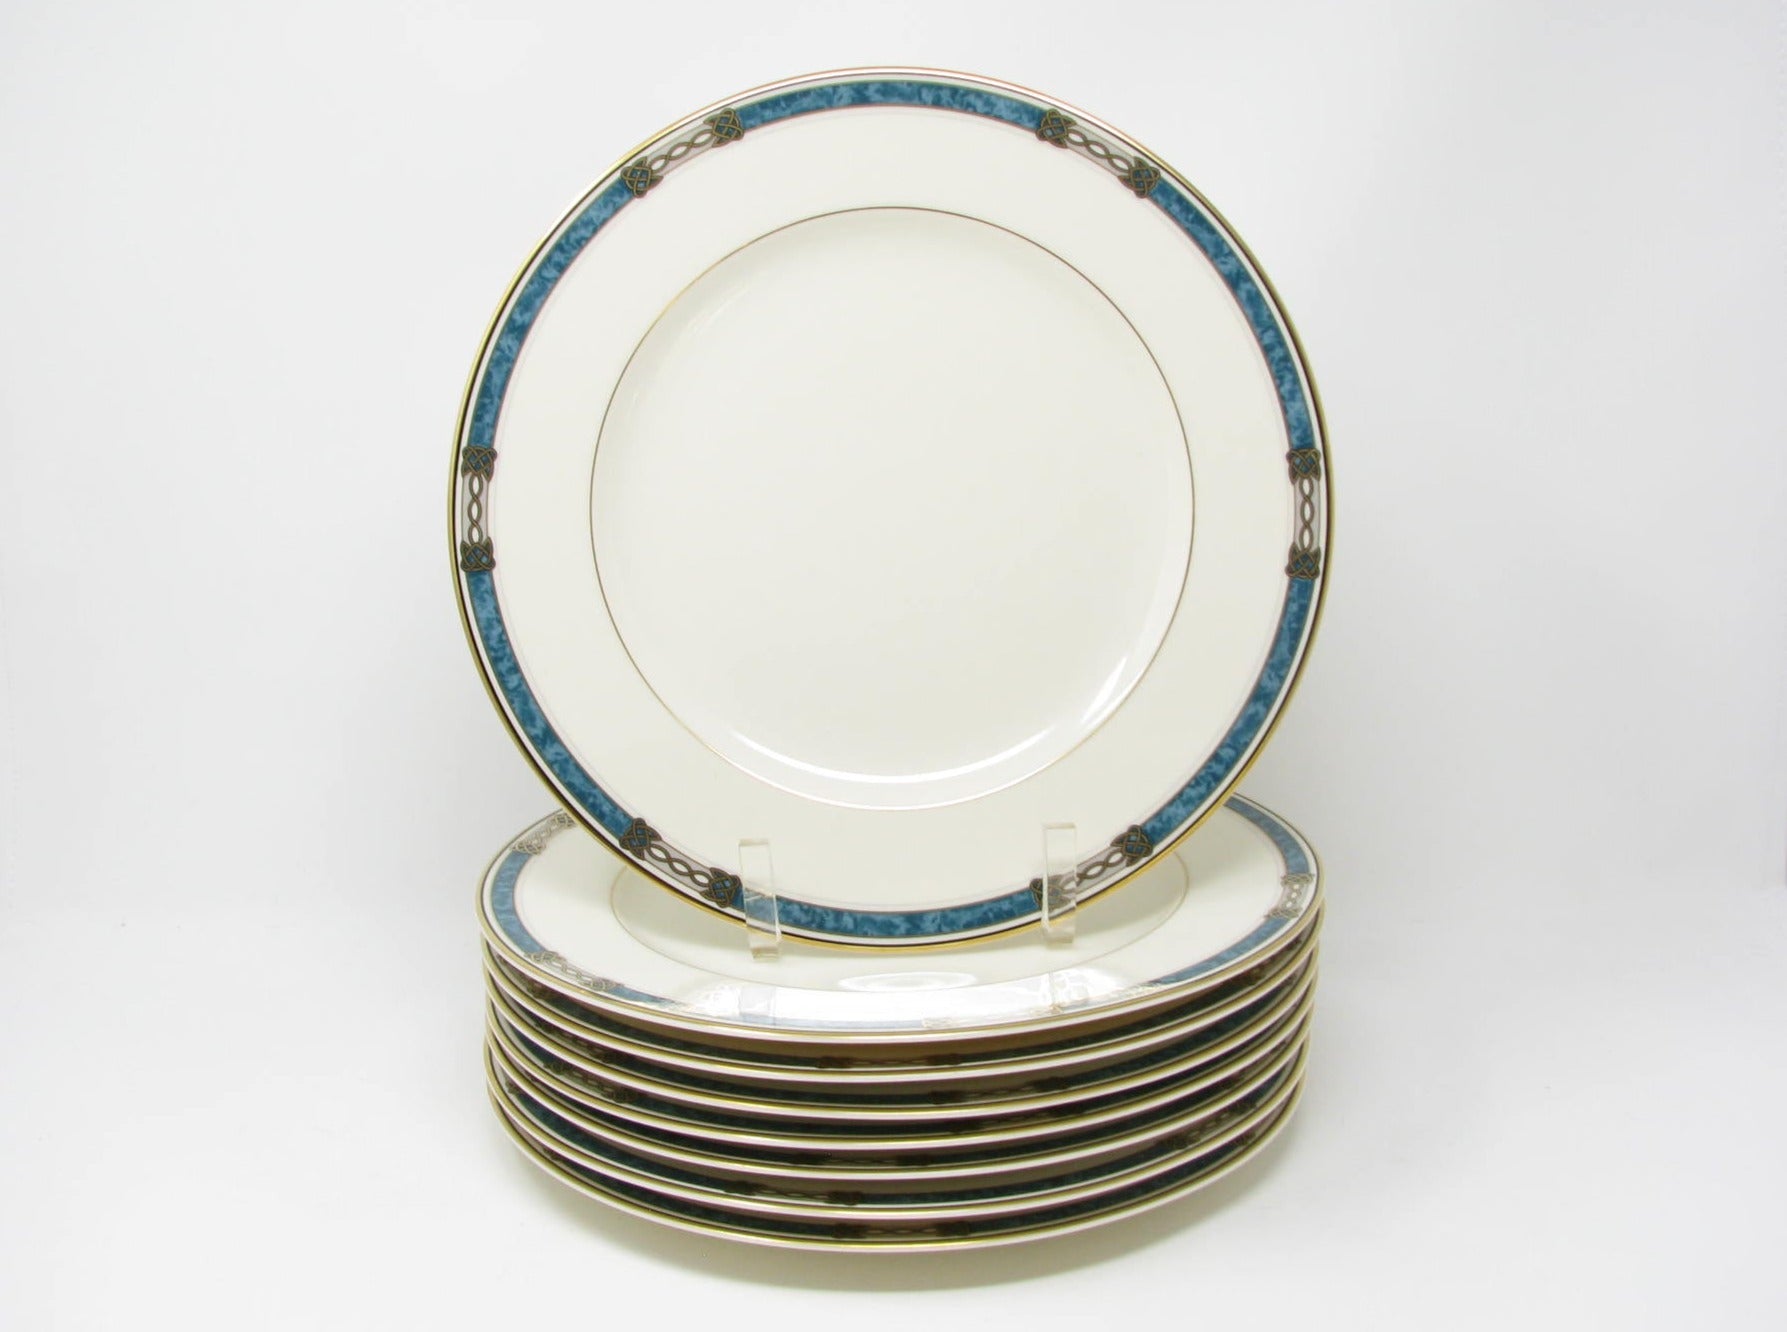 edgebrookhouse Vintage Mikasa Golden Legacy Dinner Plates with Celtic Design and Gold Rim - 8 Pieces